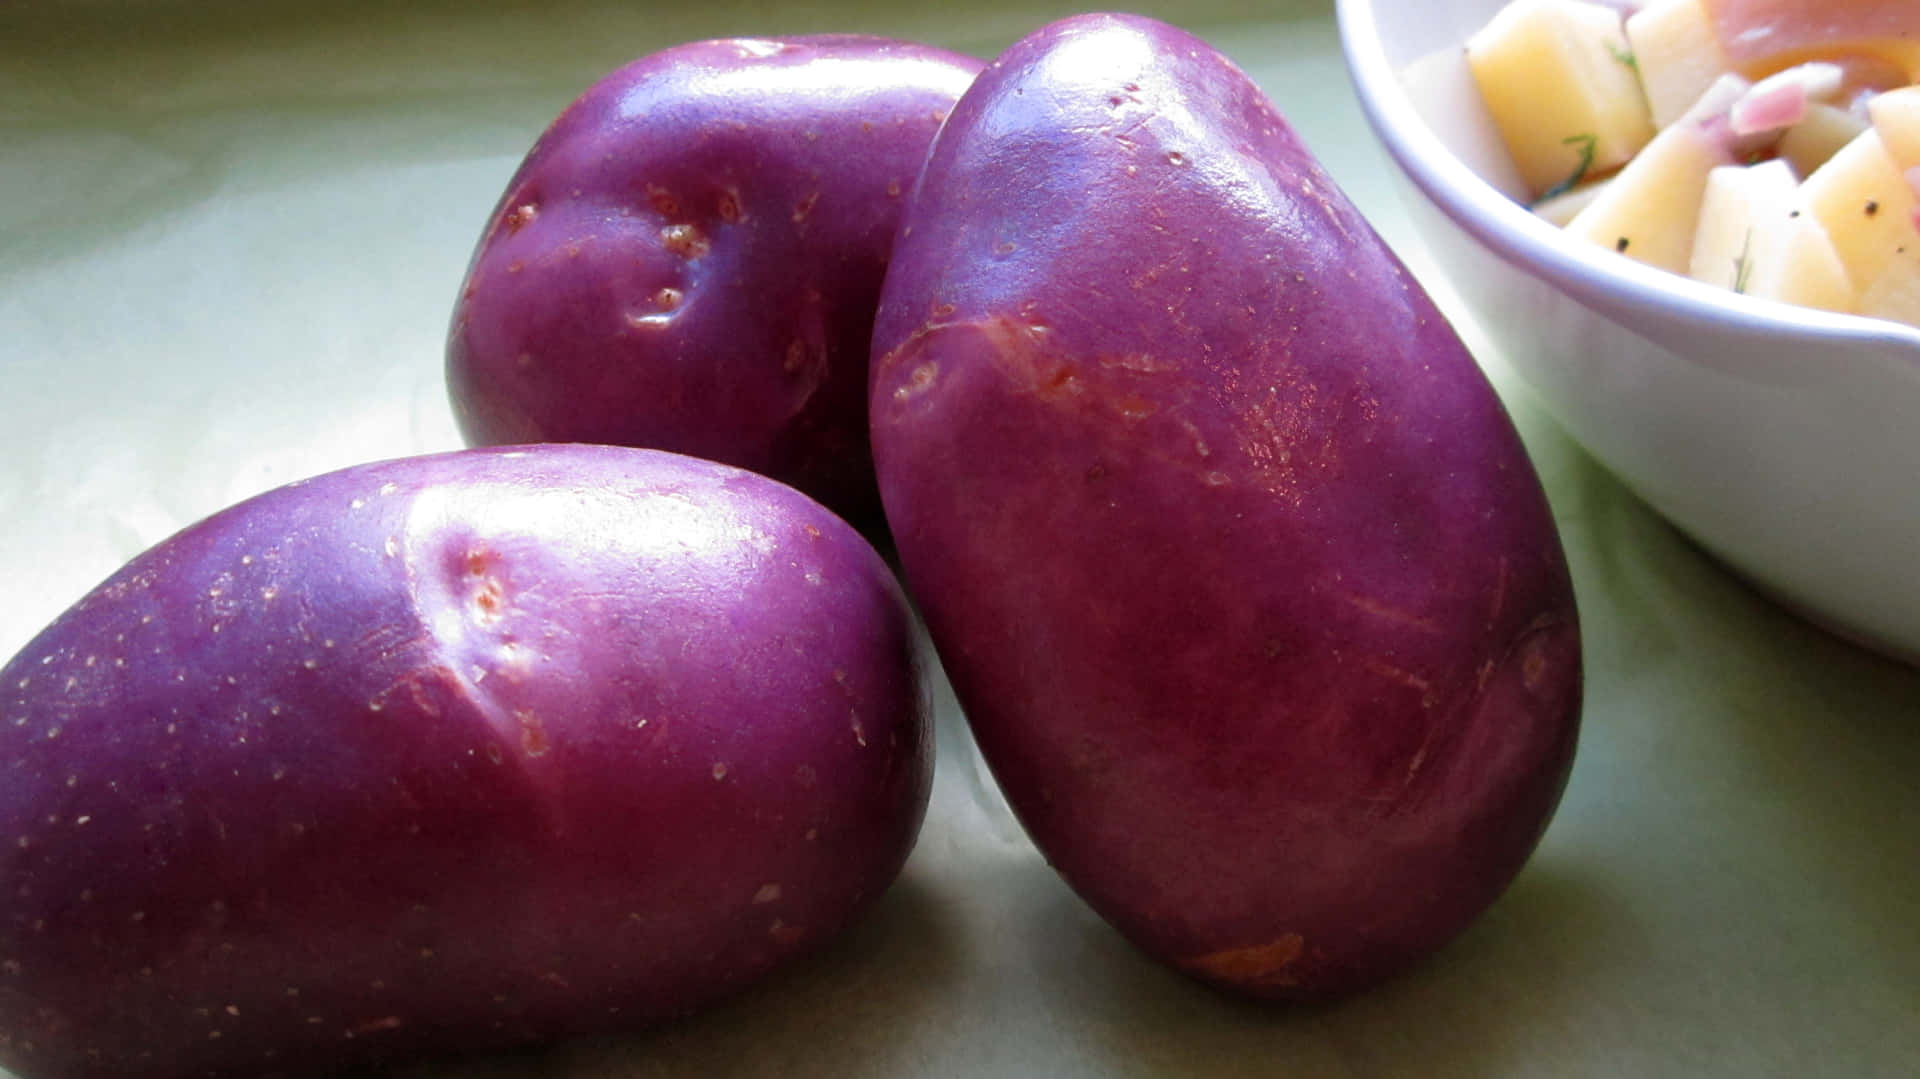 Dig into Deliciousness with Purple Potatoes Wallpaper